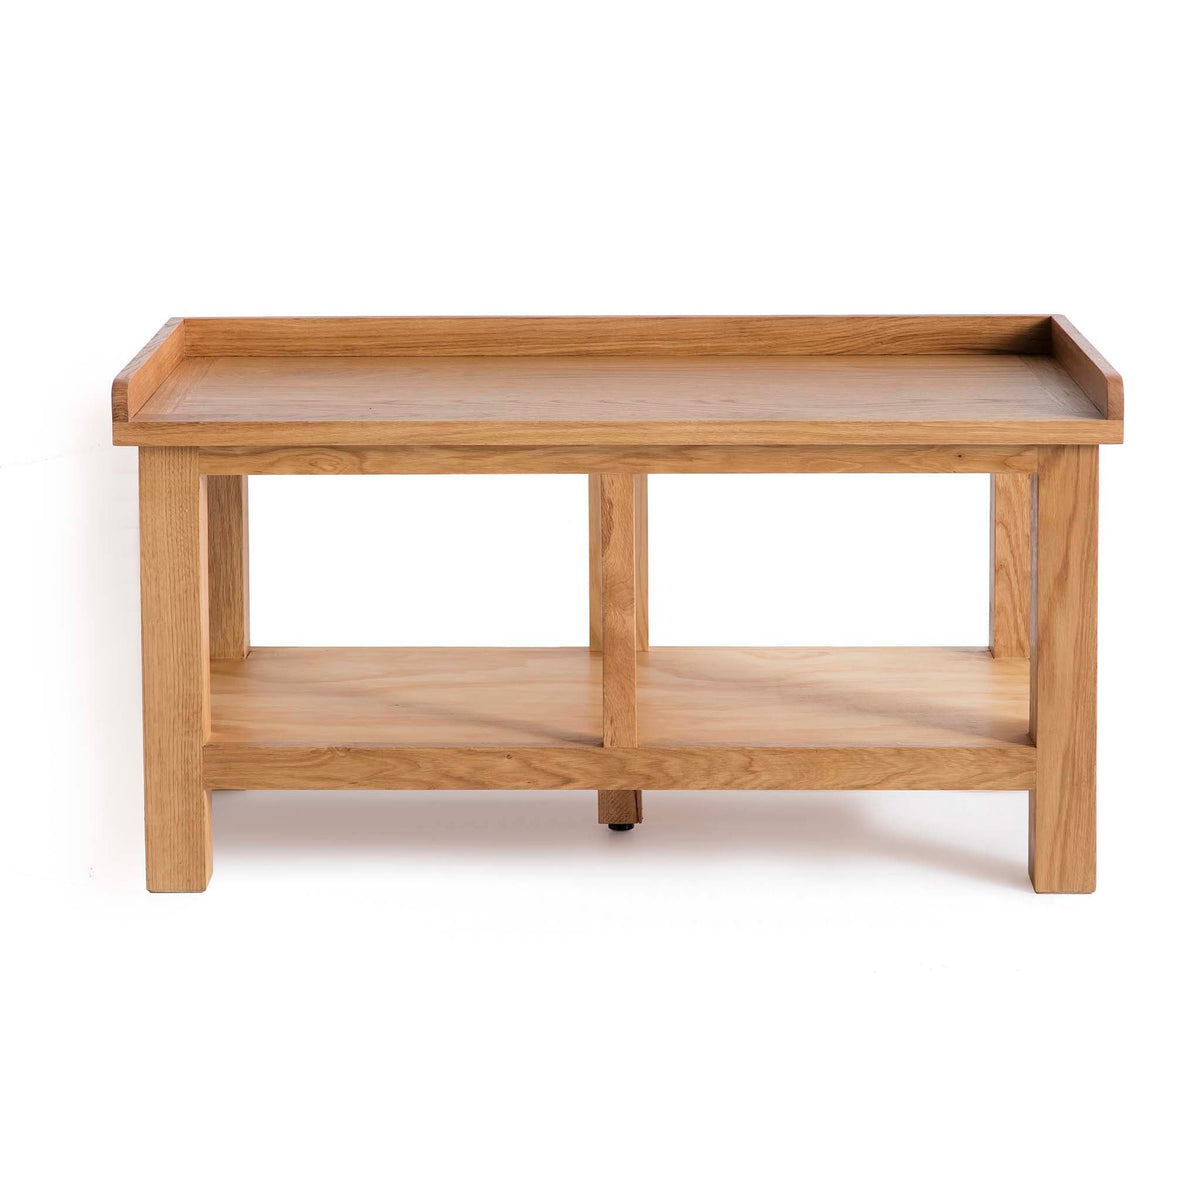 Surrey Oak Hall Bench with Baskets